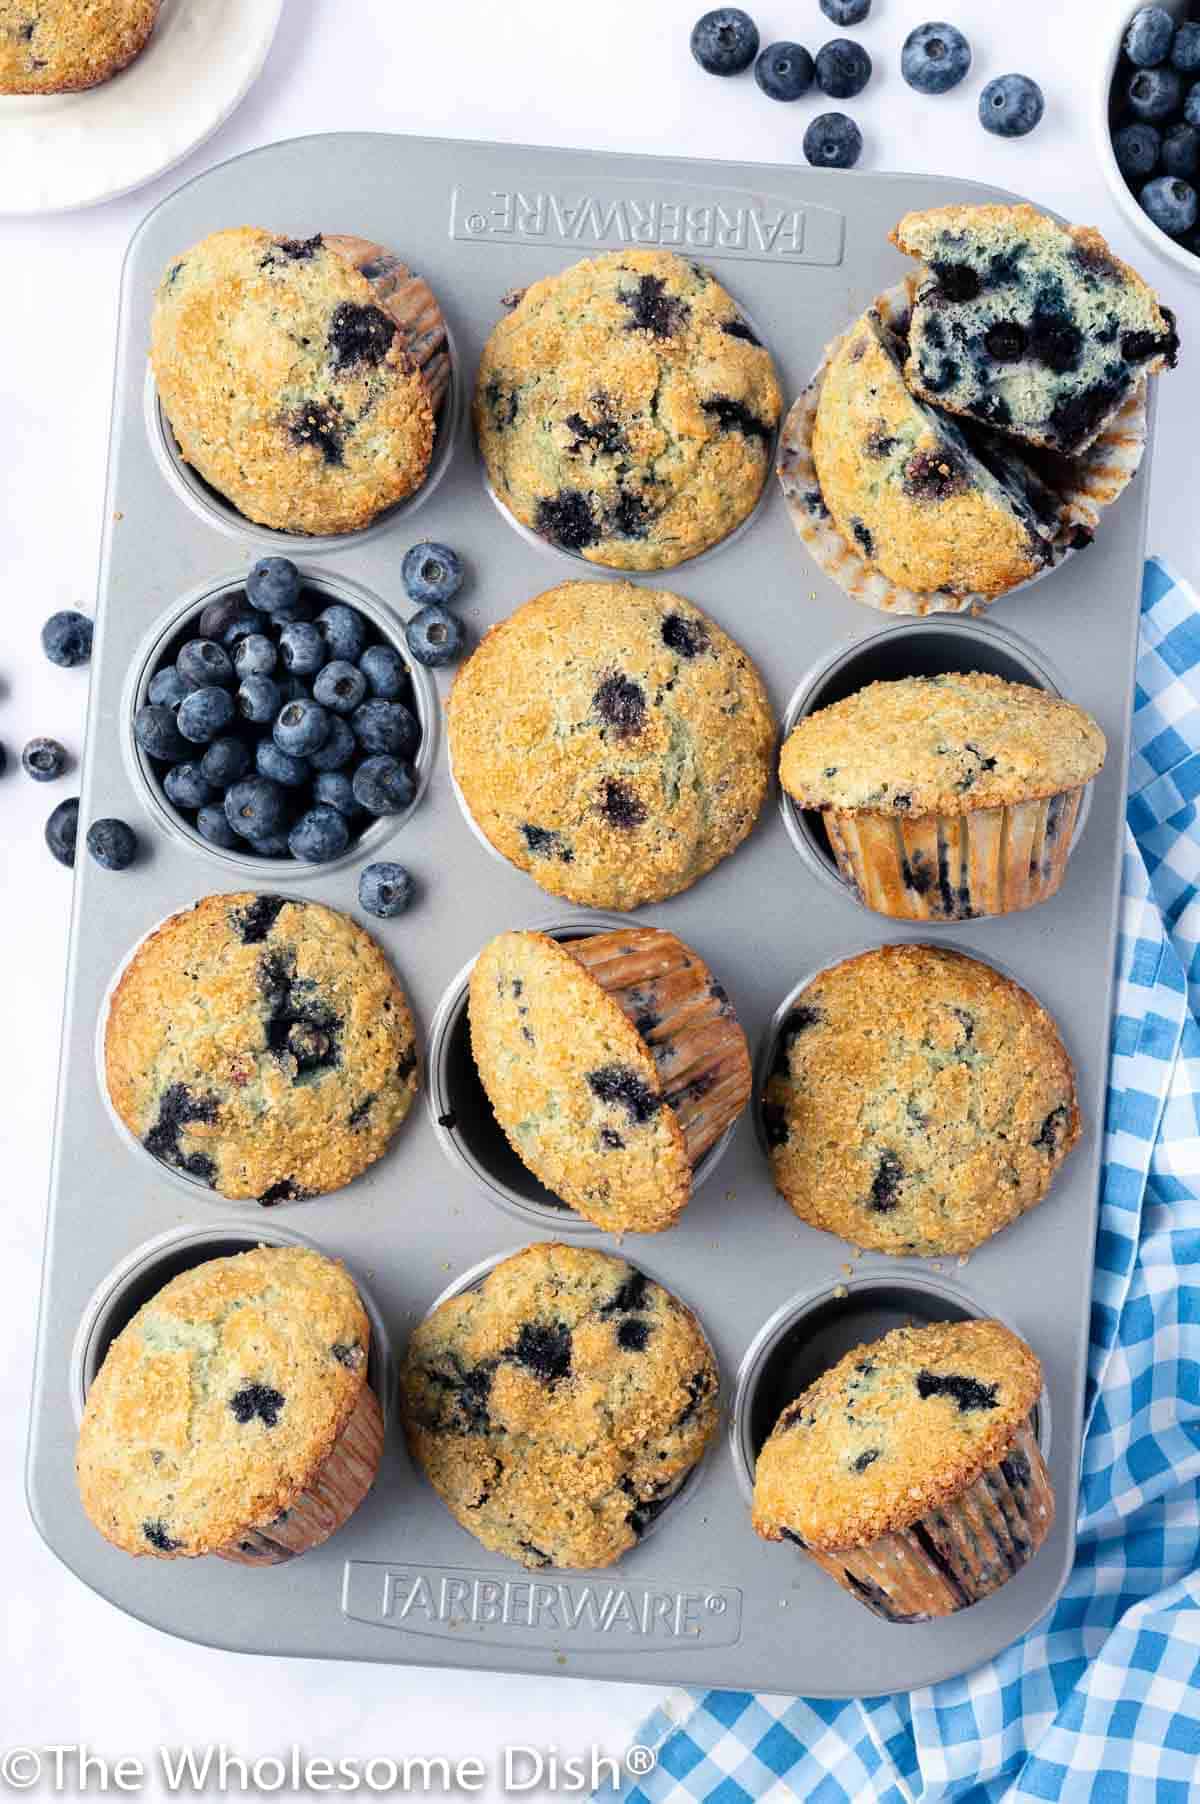 Muffin tin full of baked blueberry muffins.